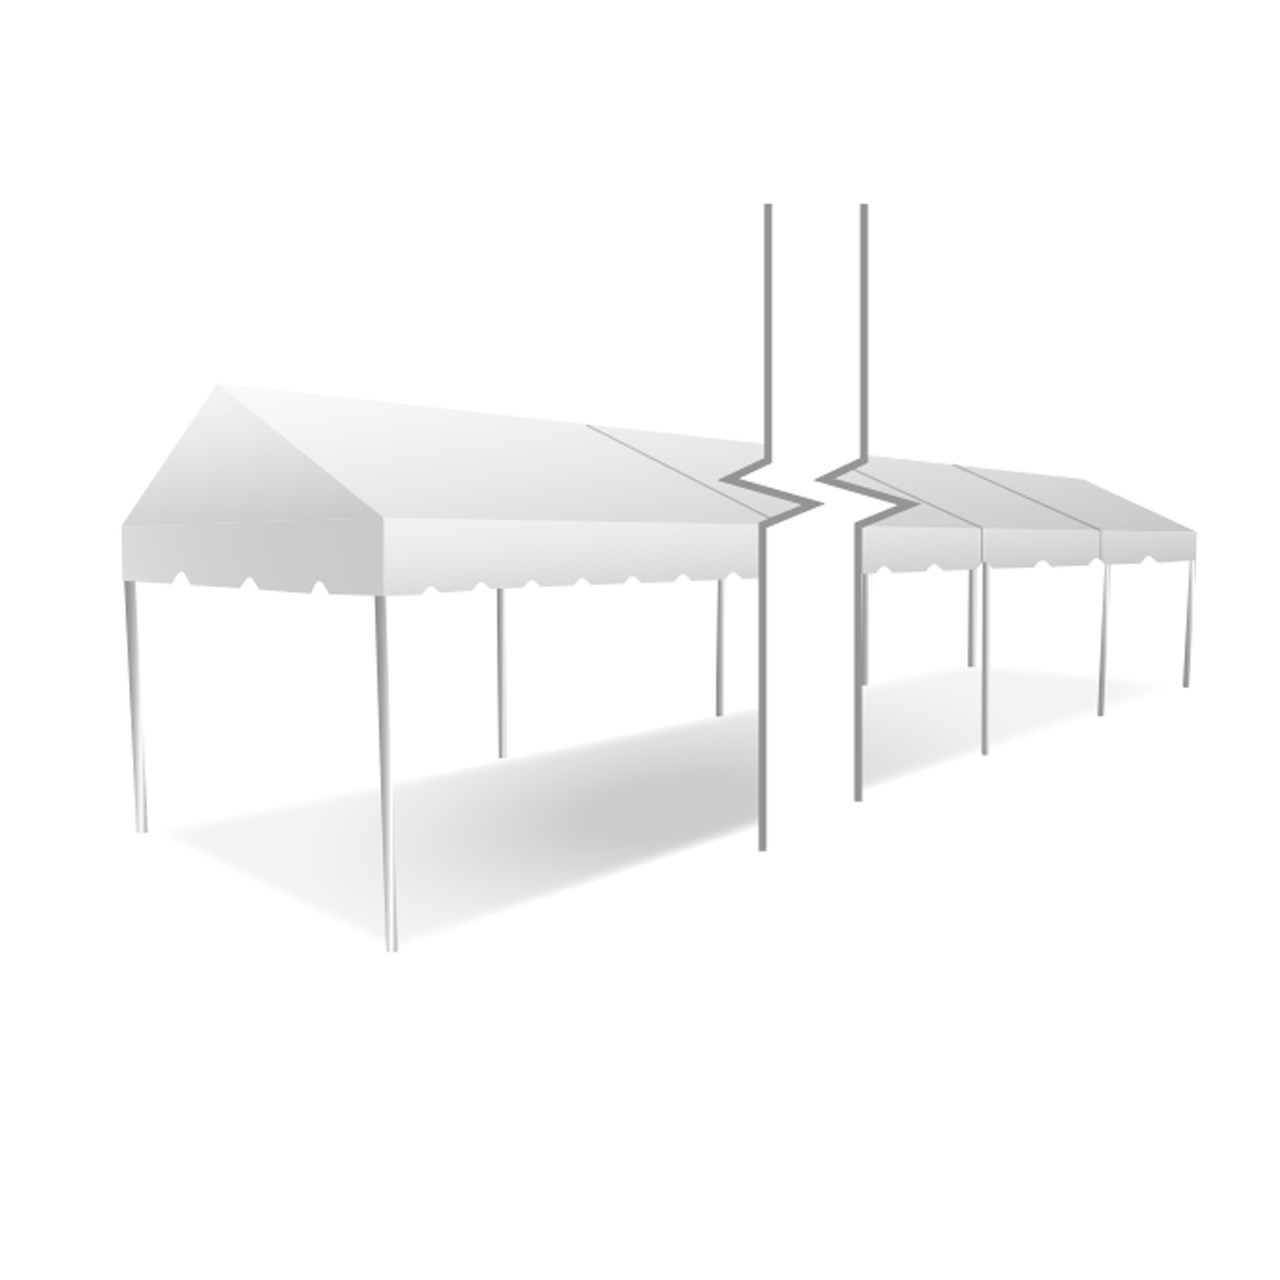 10' x 70' Classic Series Gable End Frame Tent, Sectional Tent Top, Complete